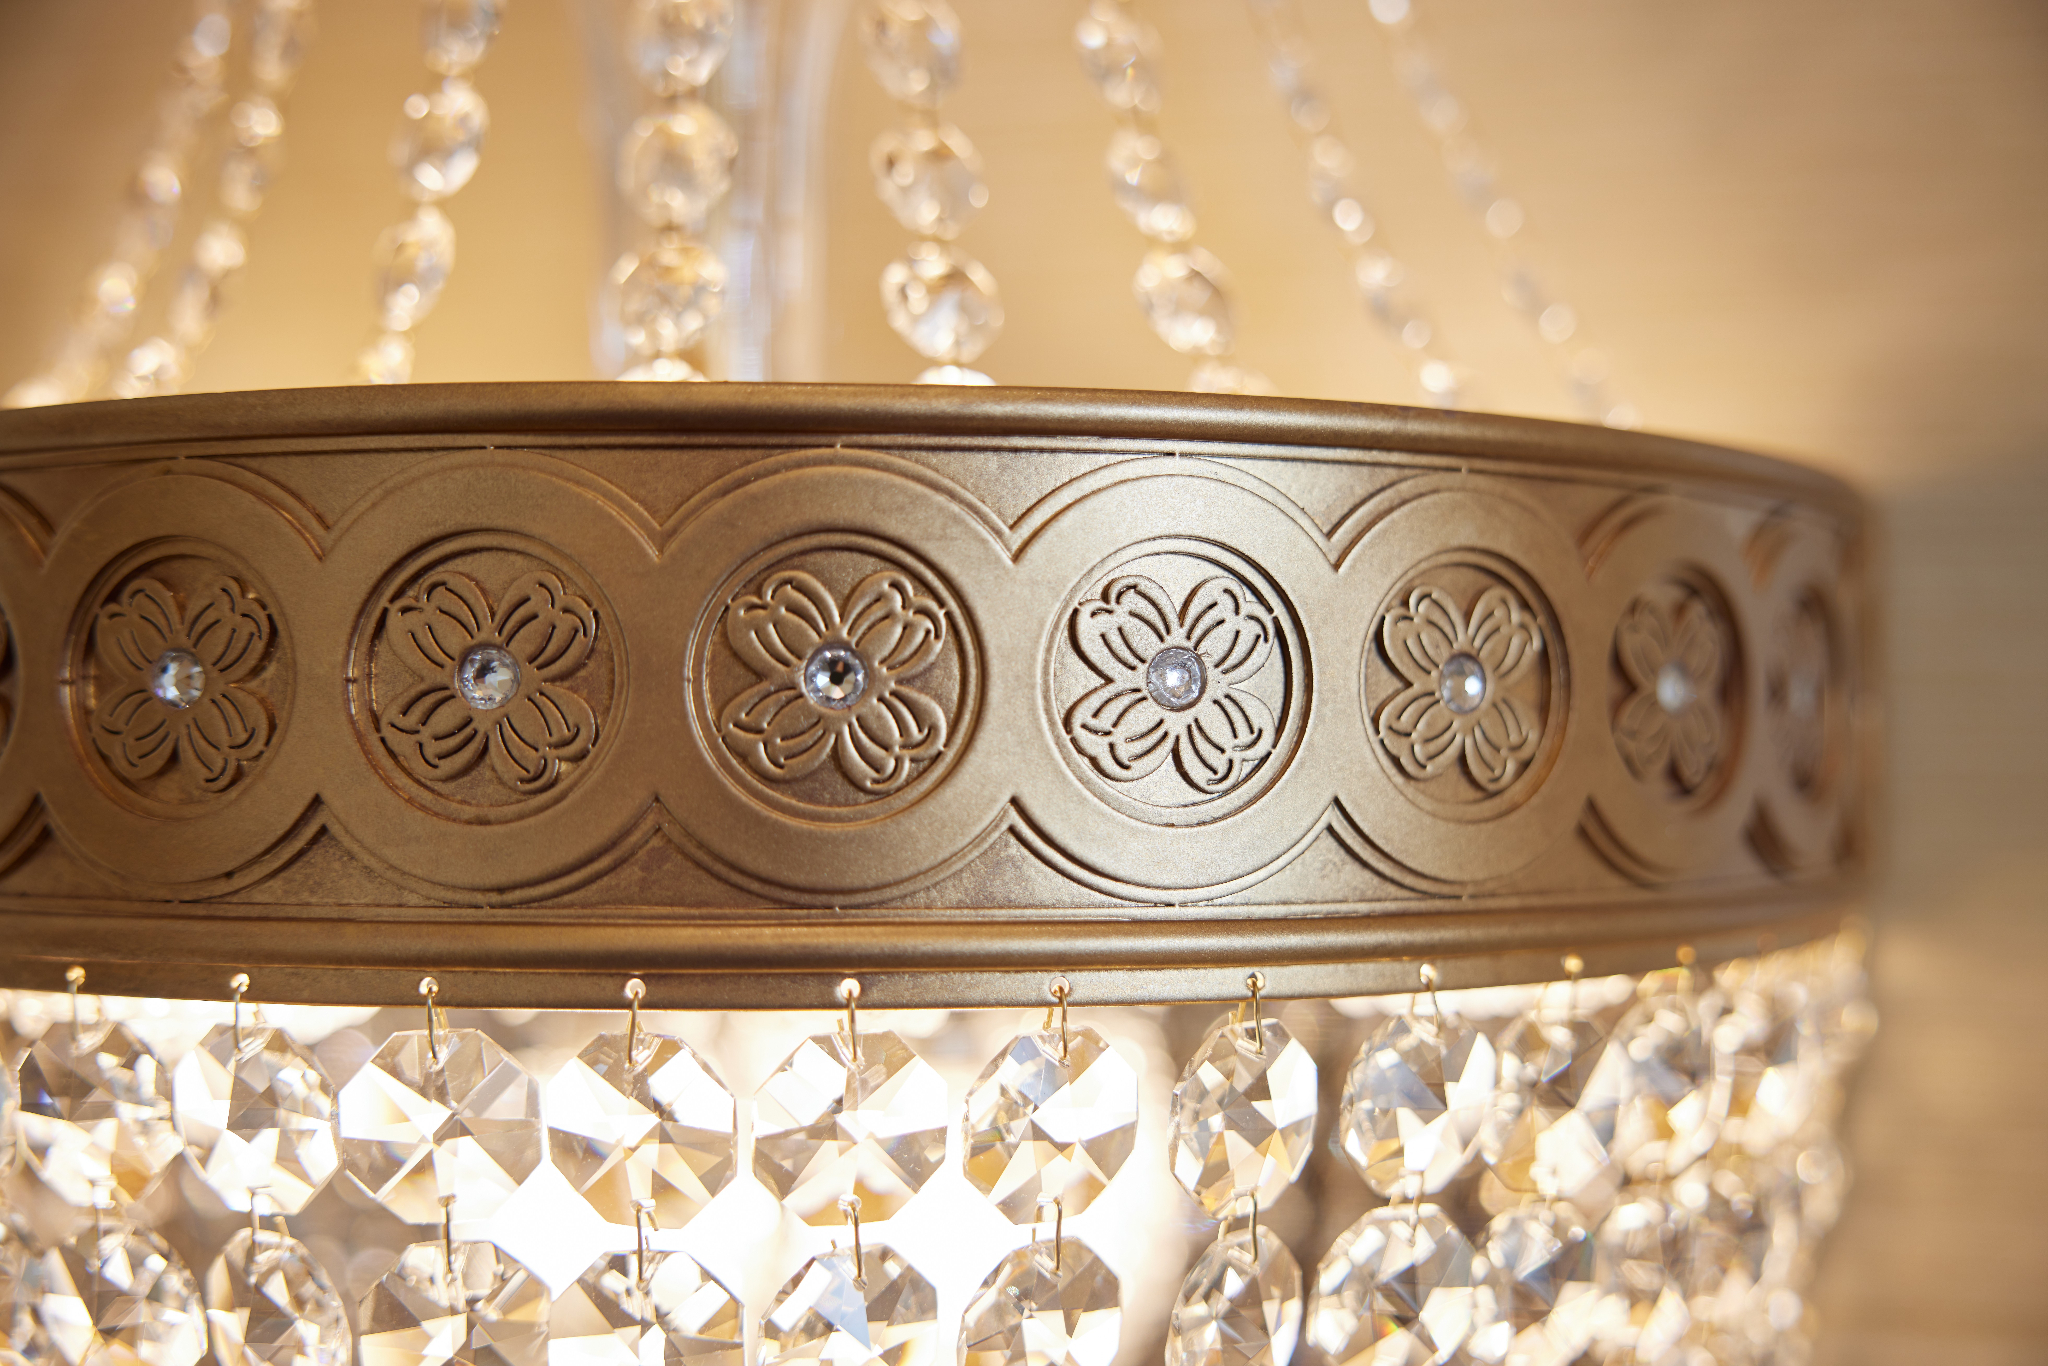 A close-up of a chandelier with a flower pattern.